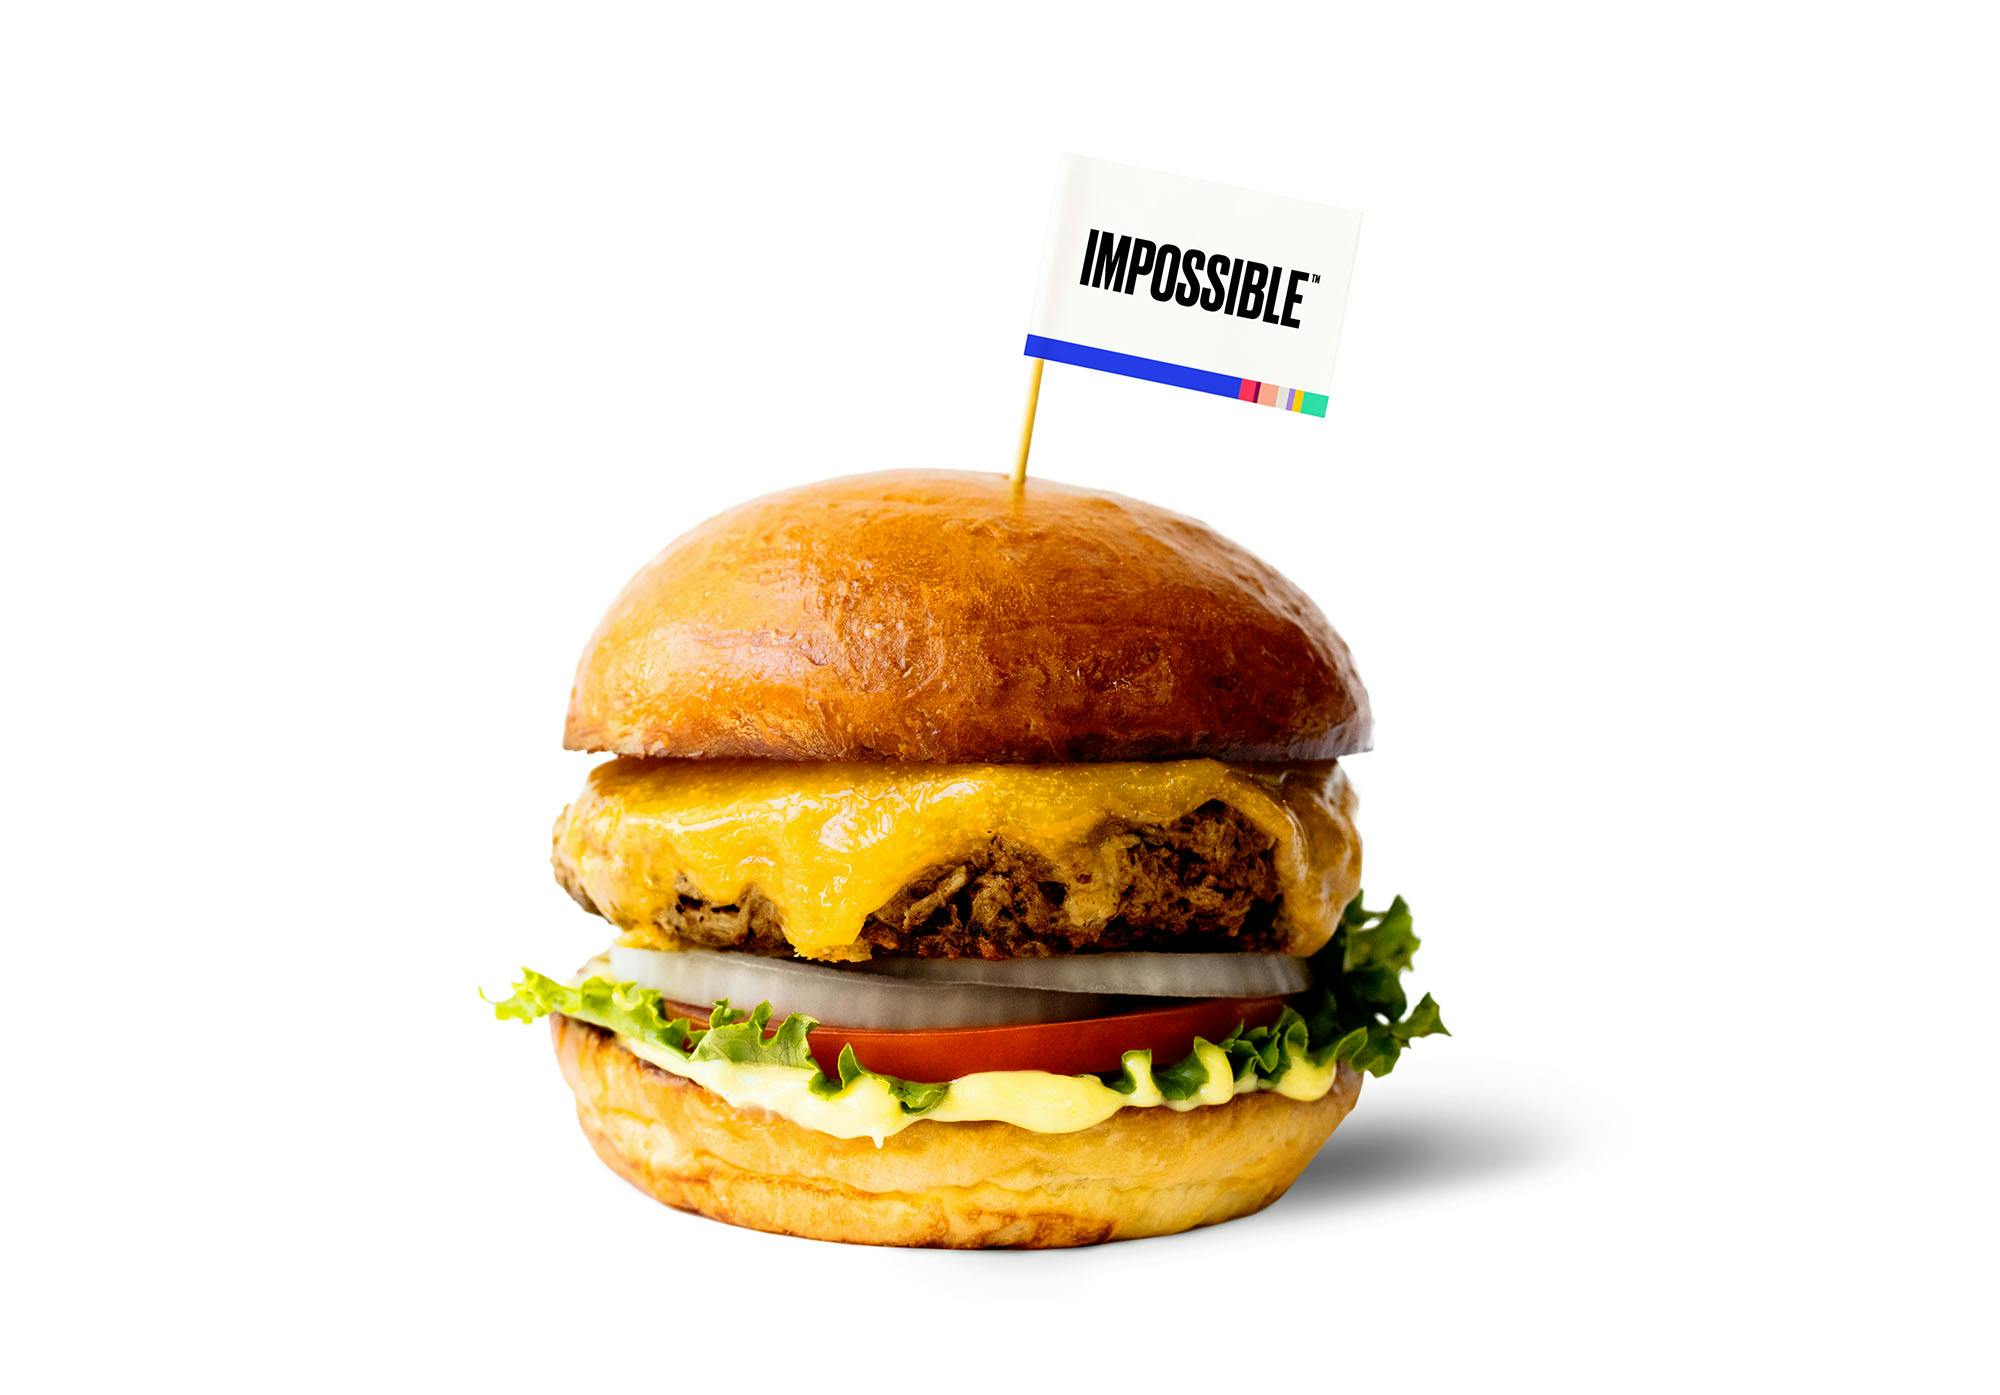 IMPOSSIBLE BURGER! CAN IT COMPARE TO THE REAL THING?!